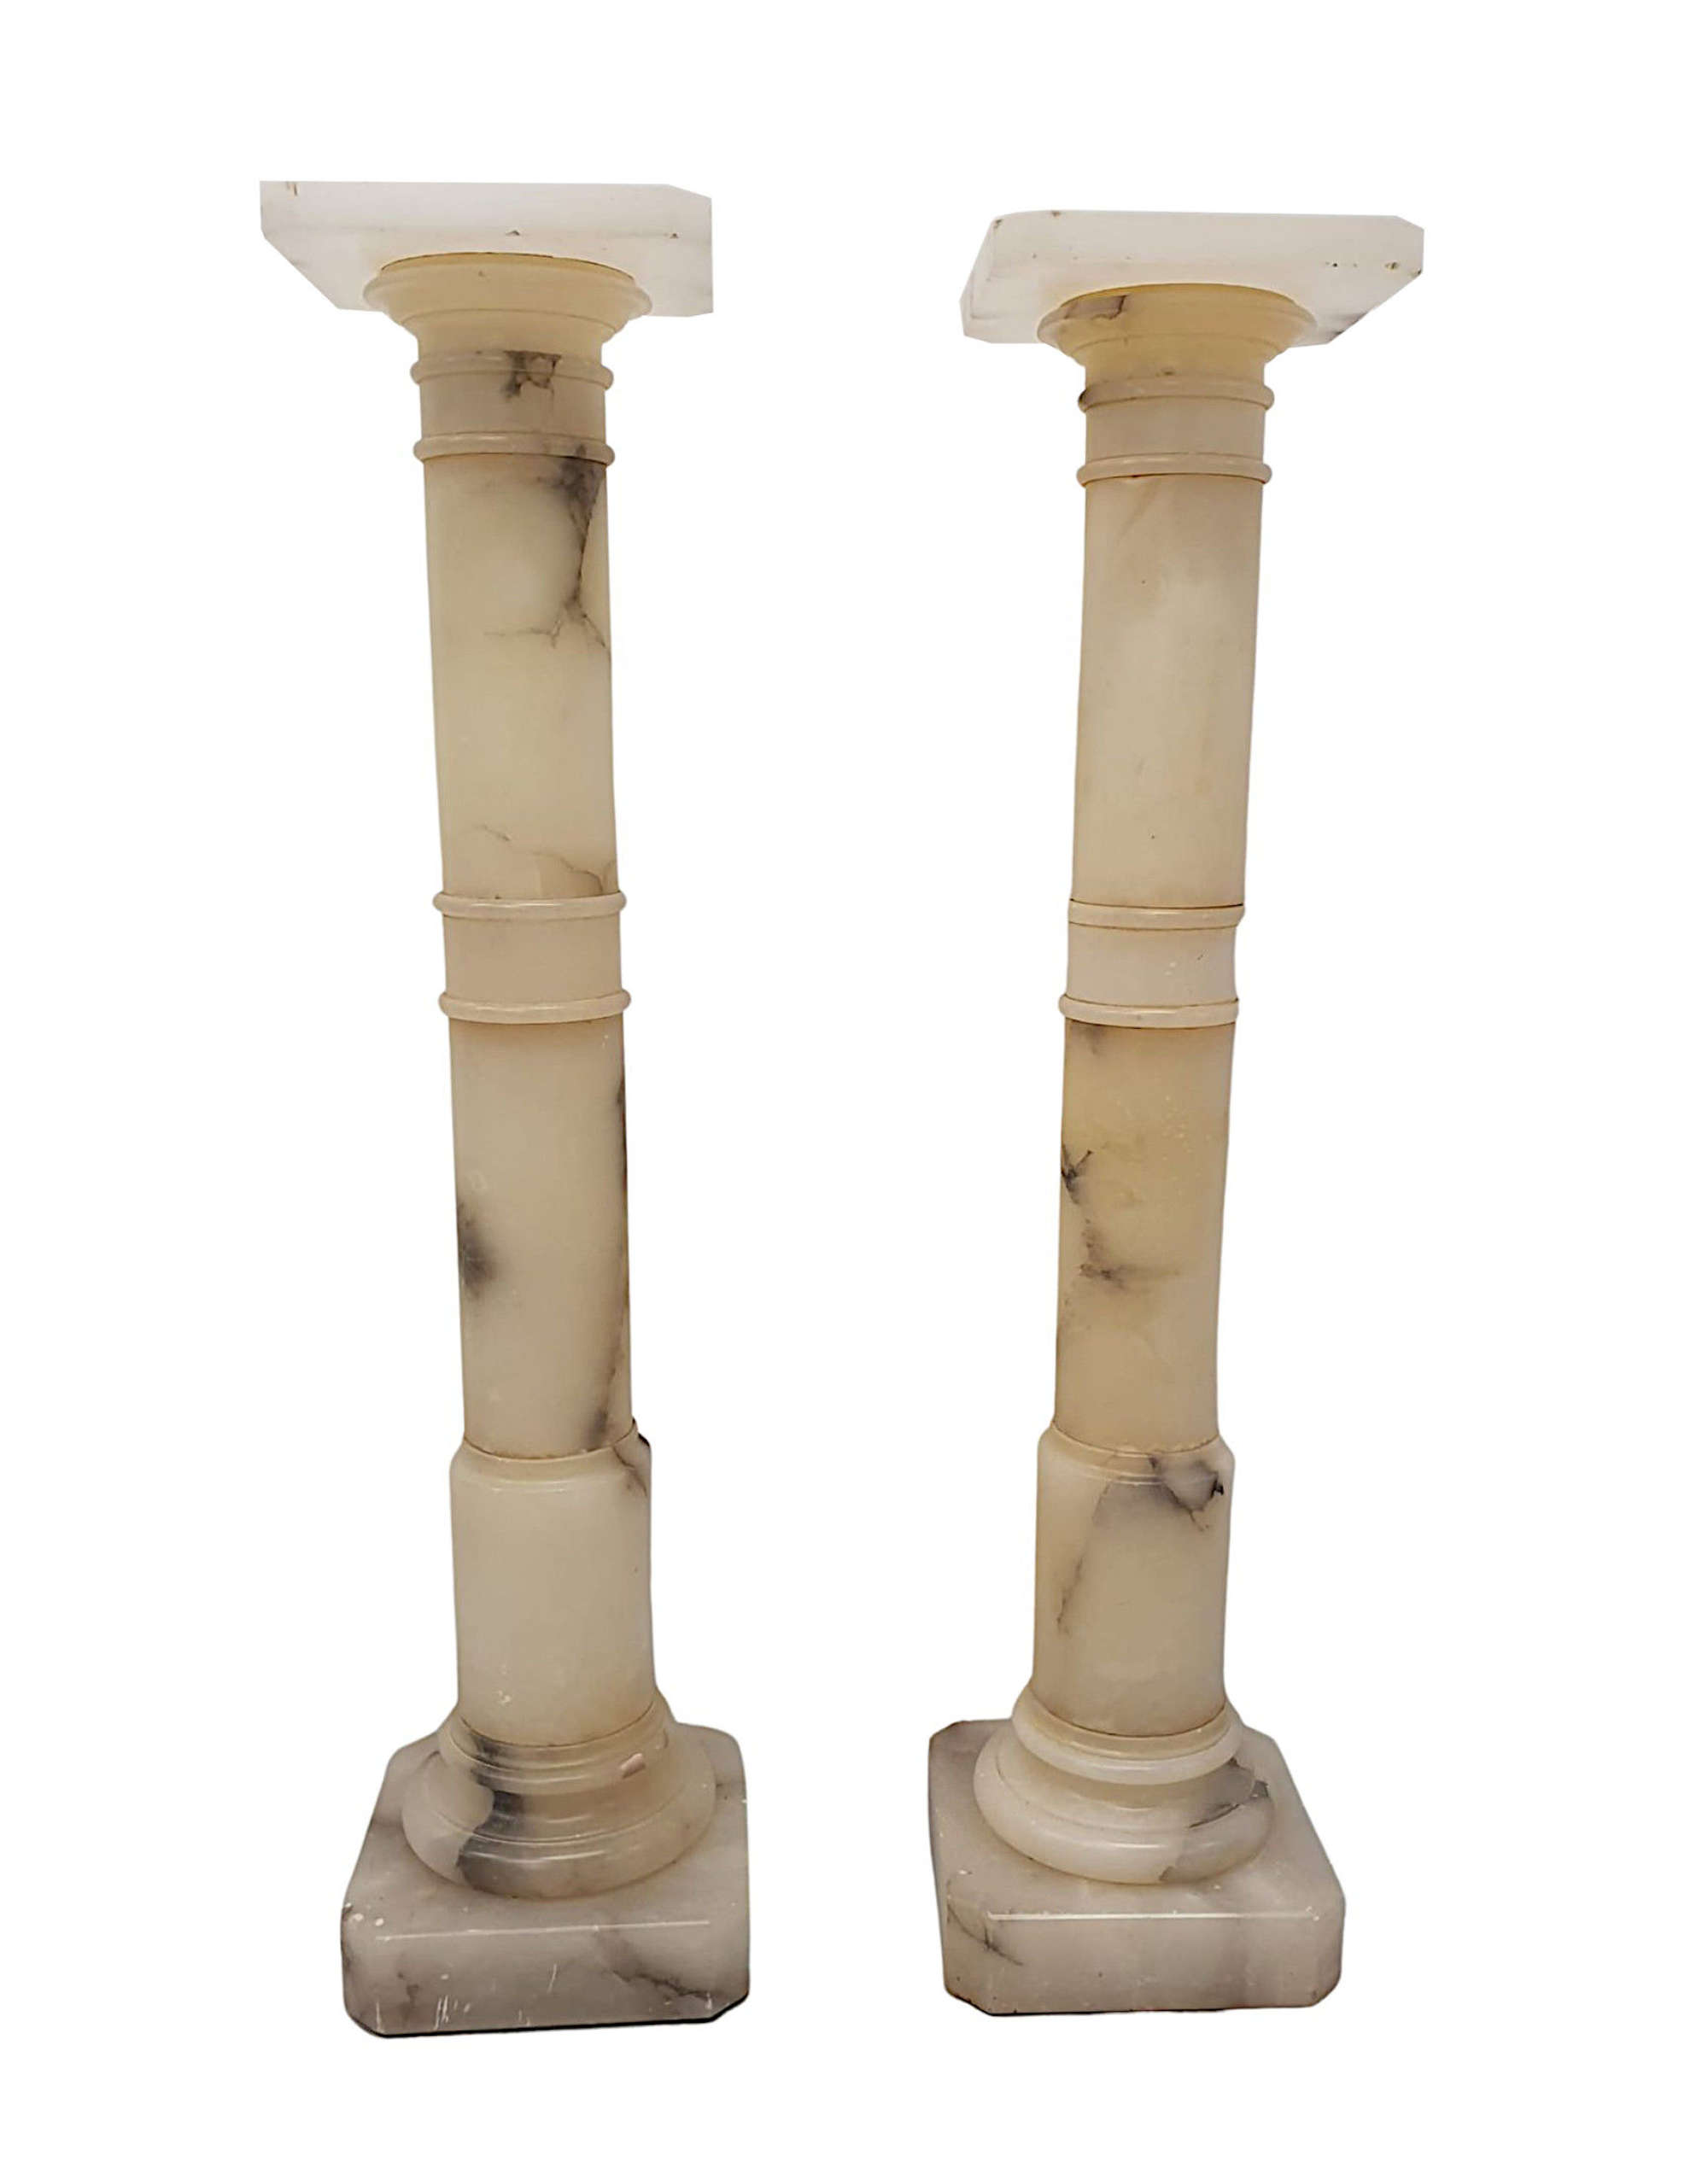 A Stunning Pair Of Early 20th Century Italian Alabaster Bust Or Plant Stands